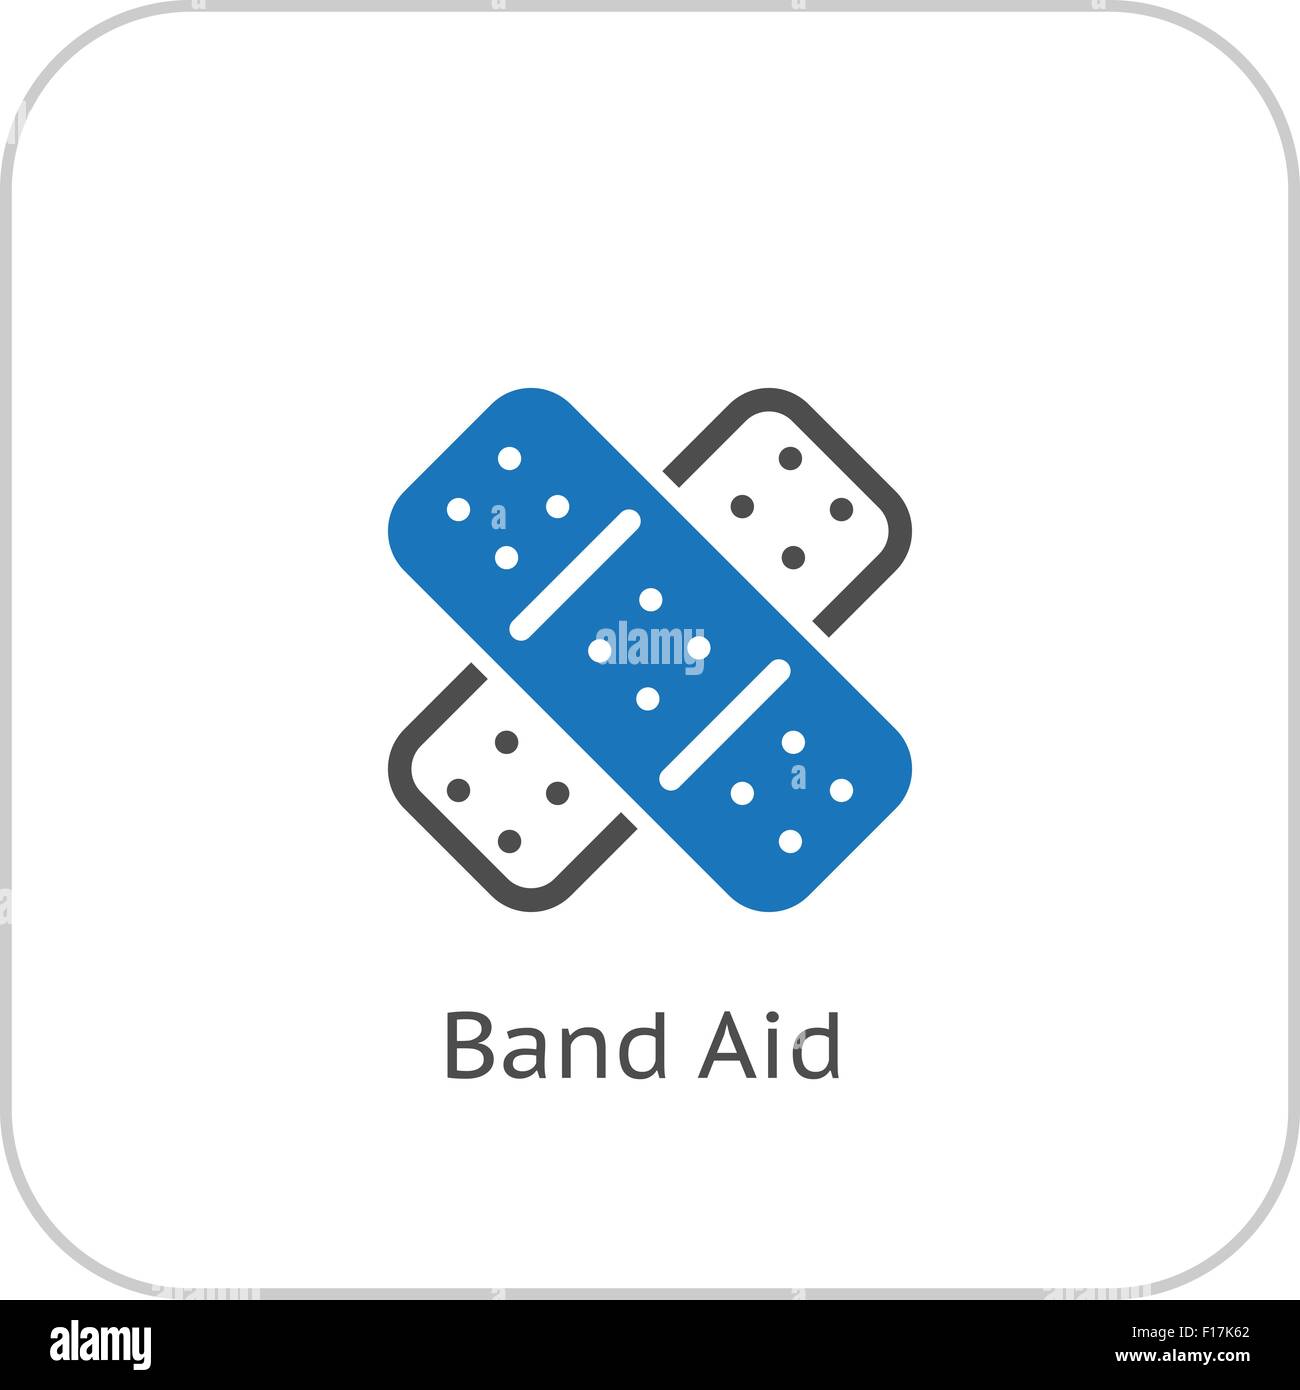 Band Aid and Medical Services Icon. Flat Design. Stock Vector